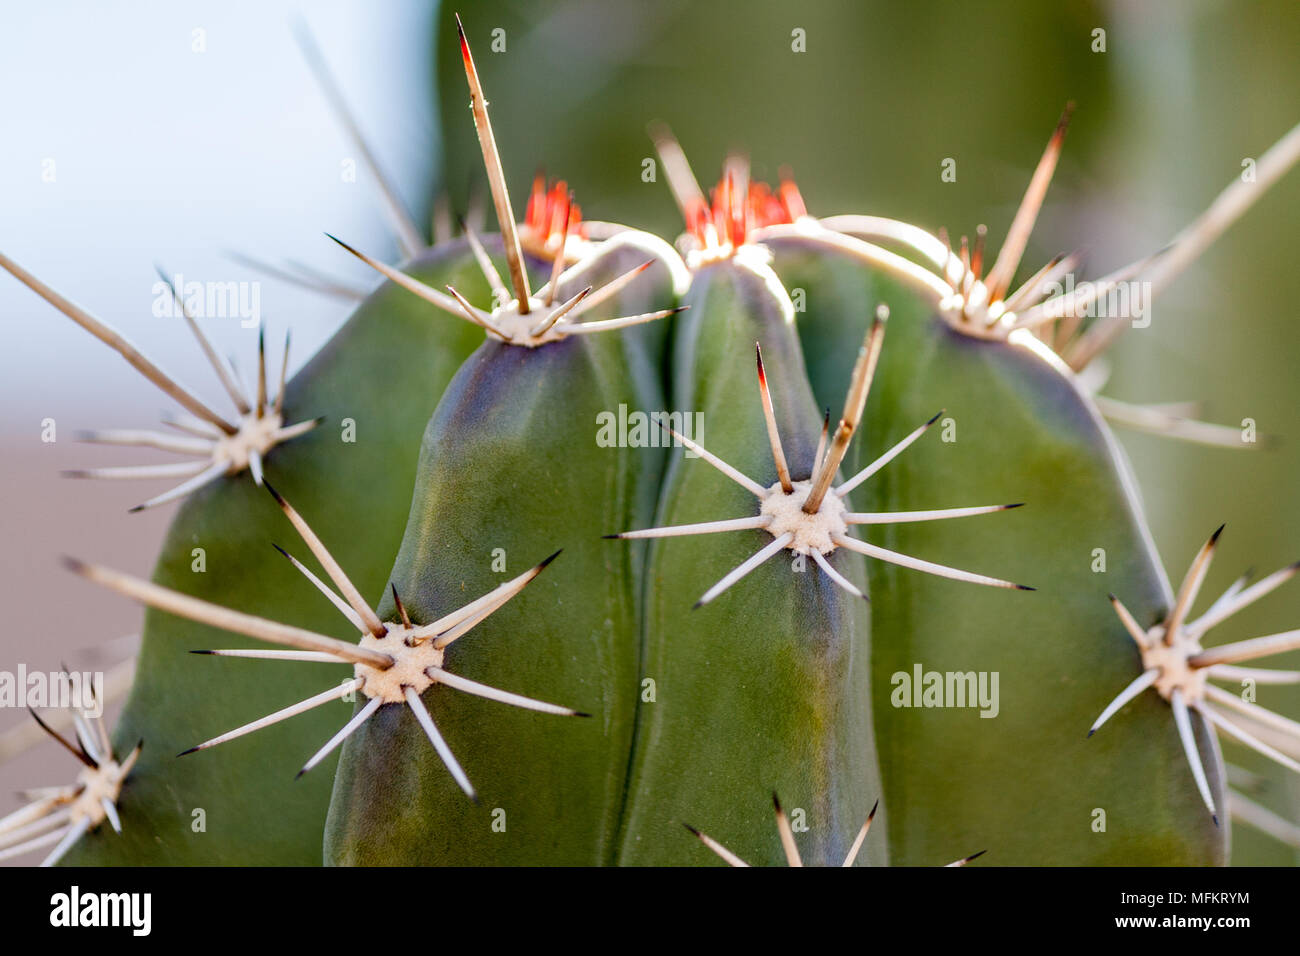 cactus spines and flowers Stock Photo